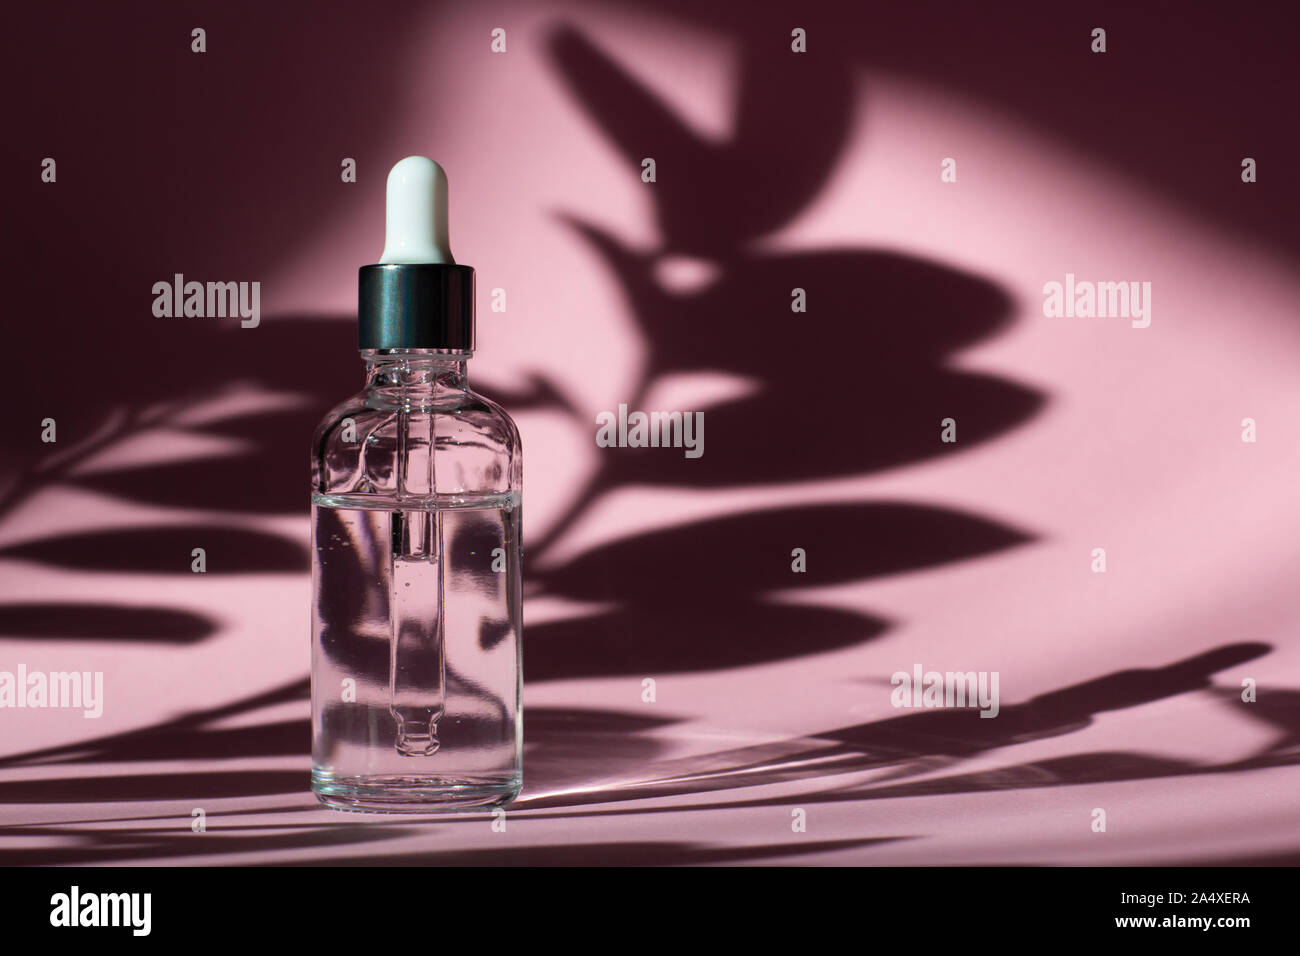 Download Cosmetic Bottle With Pipette Transparent Liquid Product In Glass Bottle With Dropper Serum Skin Care On Pastel Pink Background And Plant Shadows Front View With Copy Space Beauty Product Mockup Stock Photo